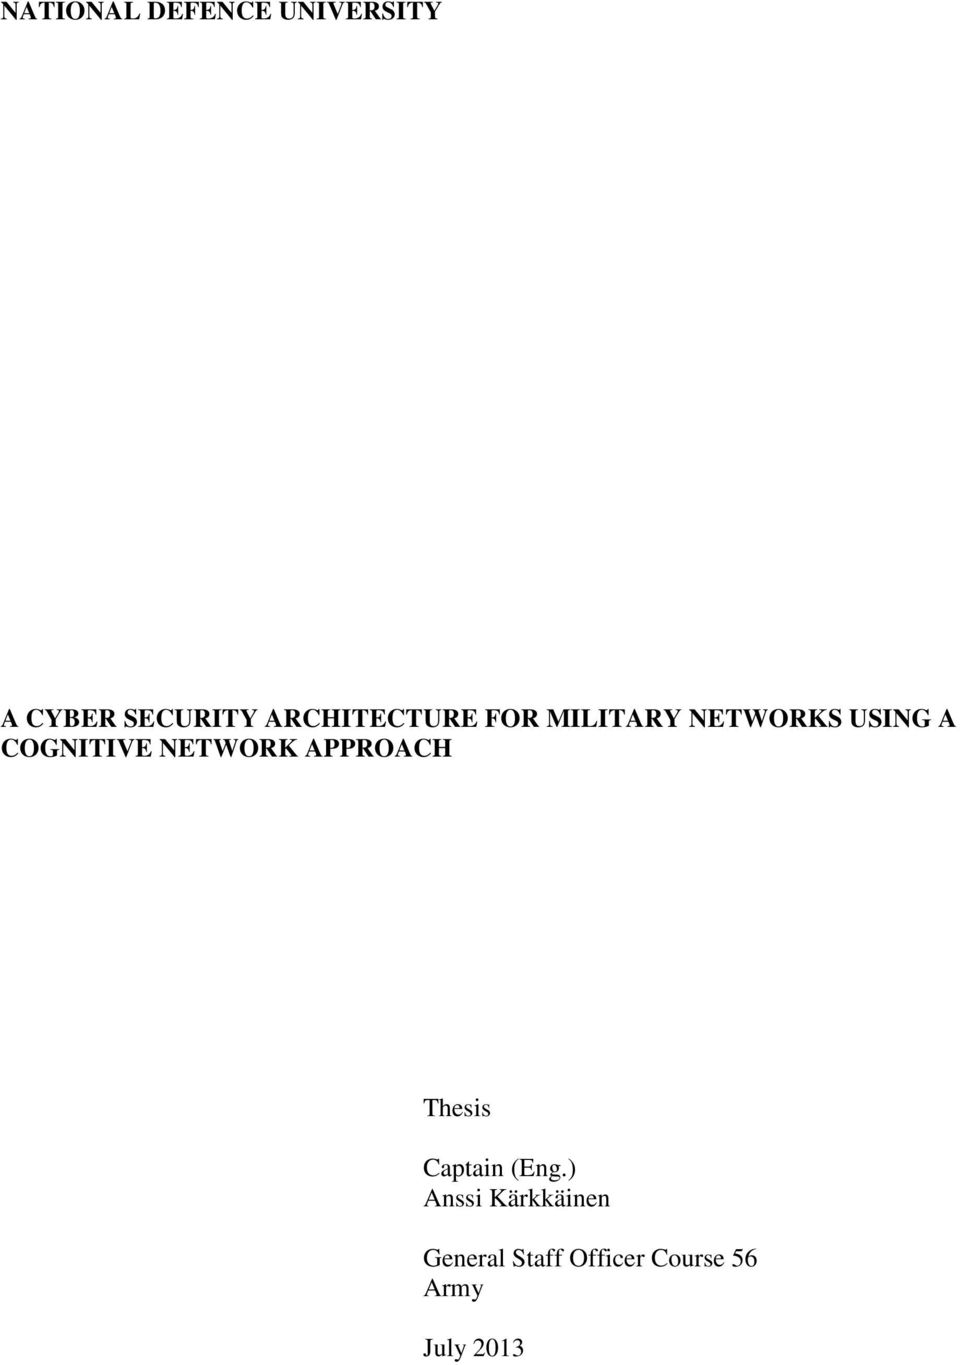 cyber security thesis pdf